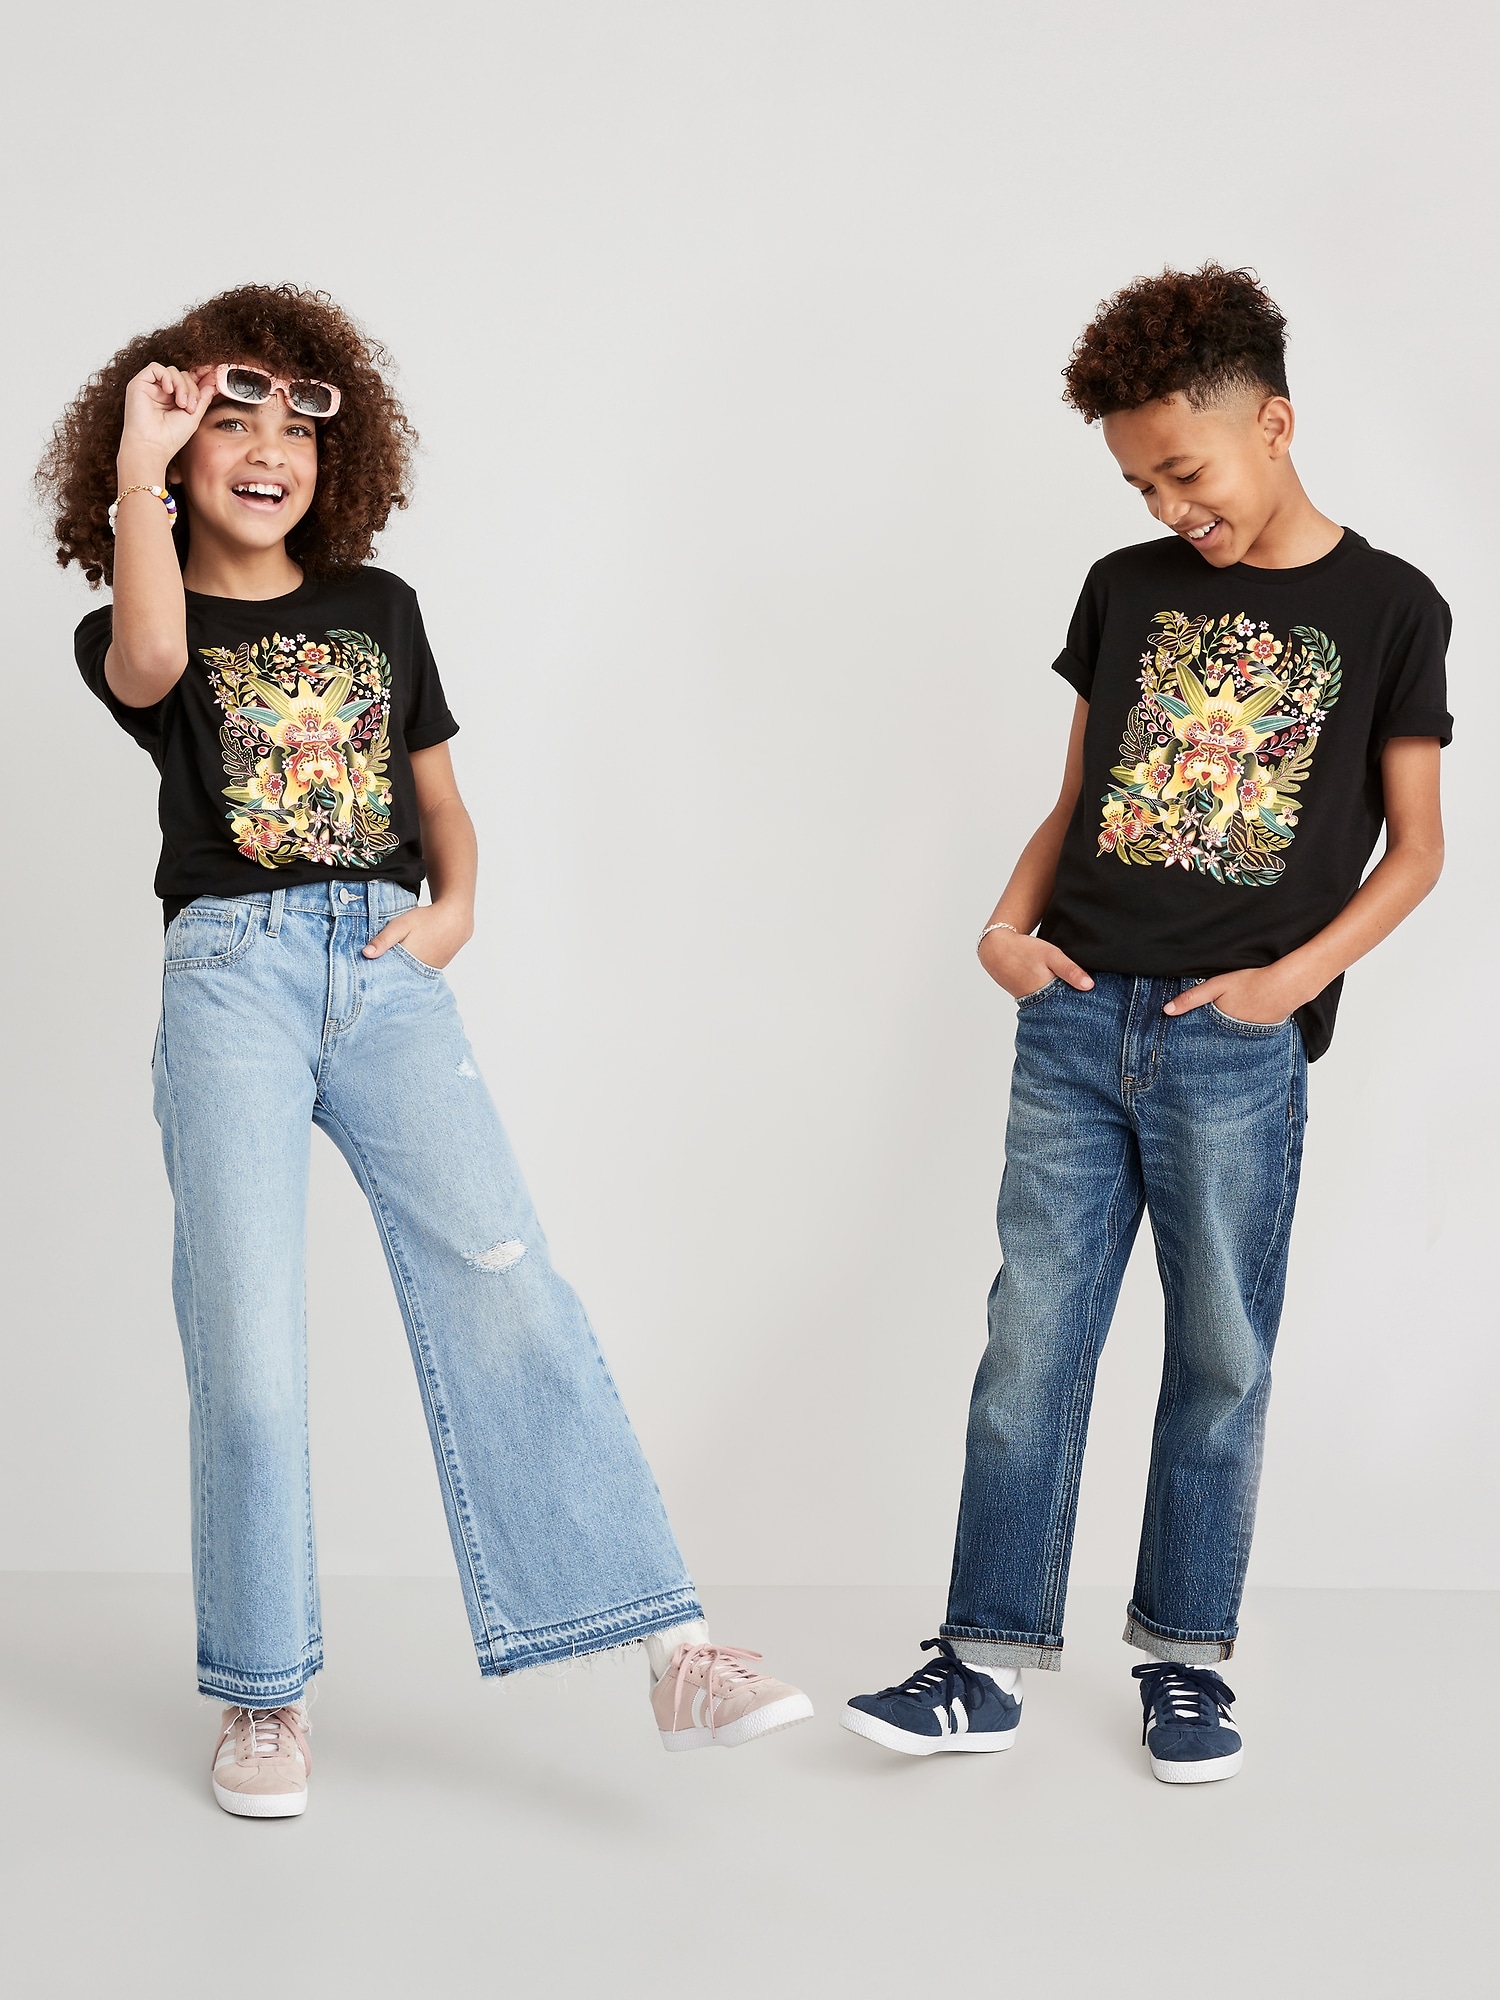 Old Navy Project WE Matching Graphic T-Shirt for Kids black. 1